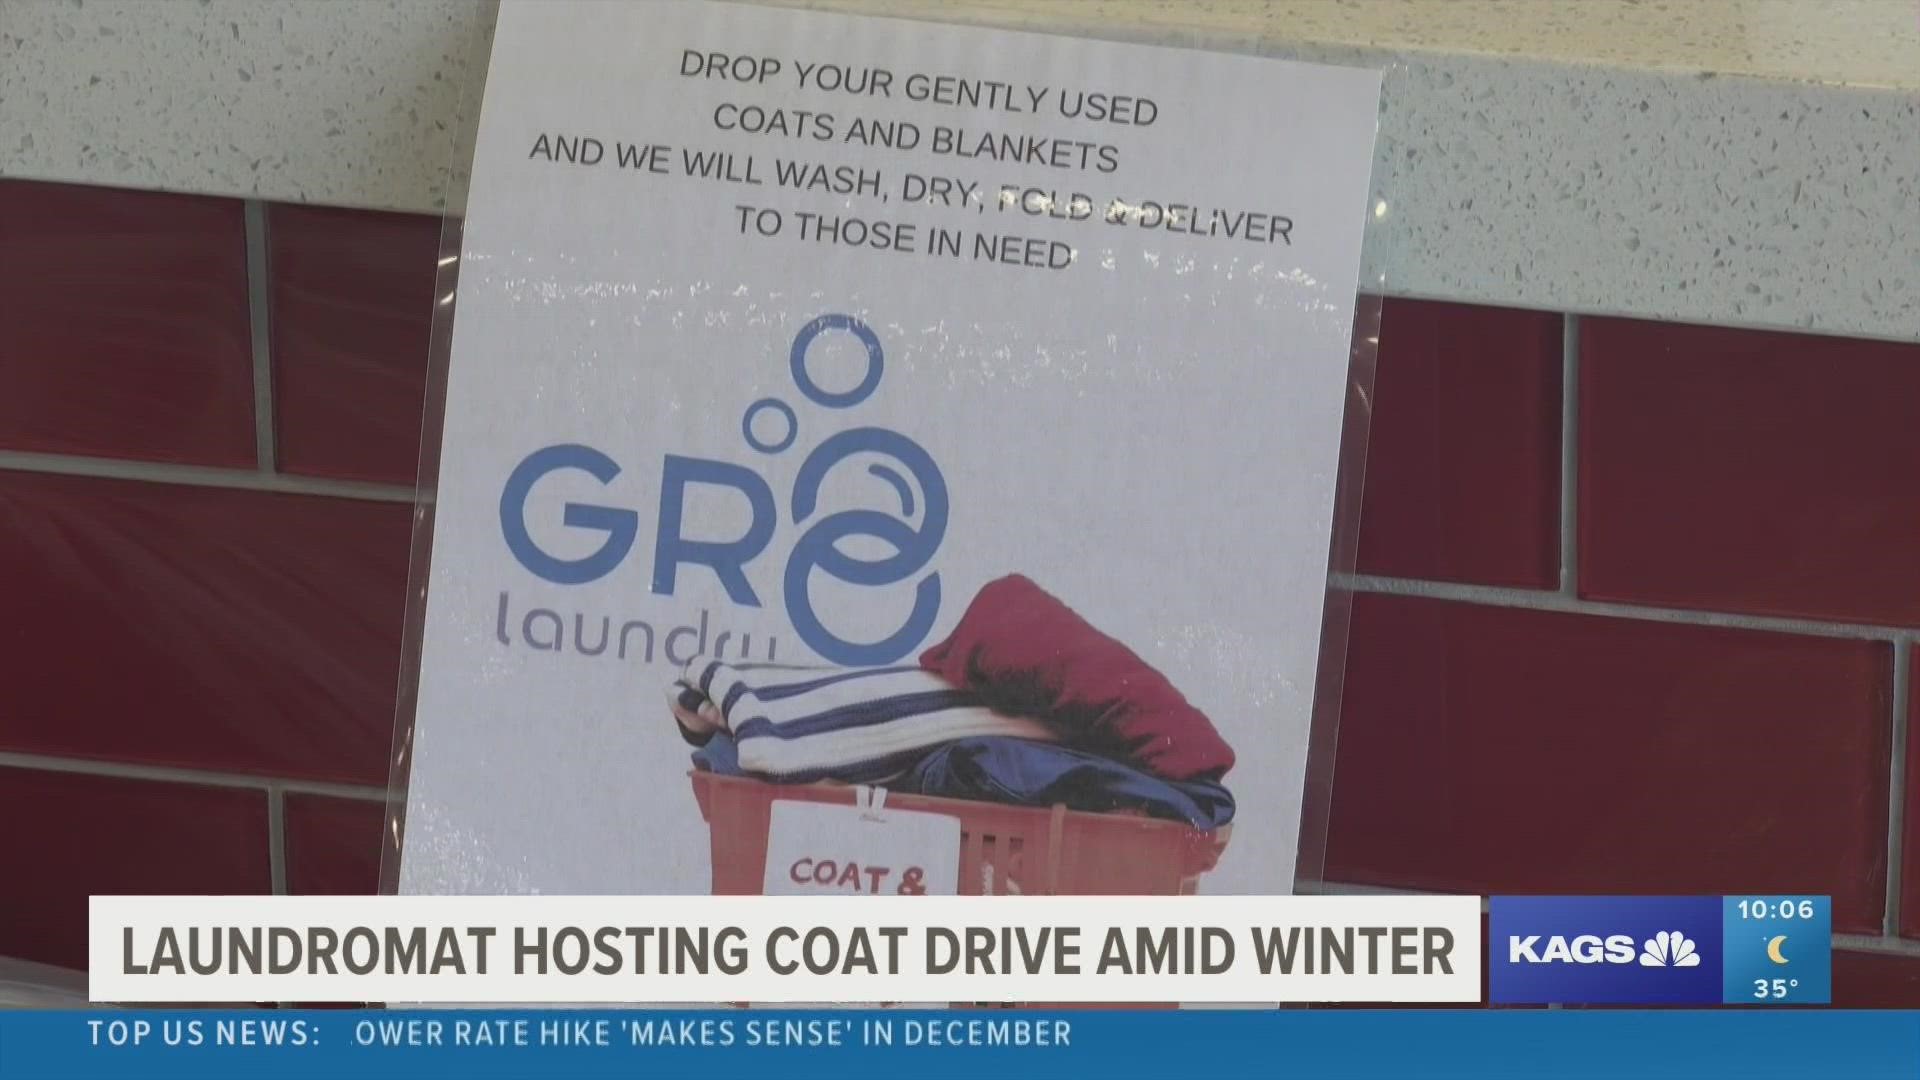 As November comes to a close, December's chills bring the need for more warmth, and one laundromat is providing that warmth for children in need this holiday season.